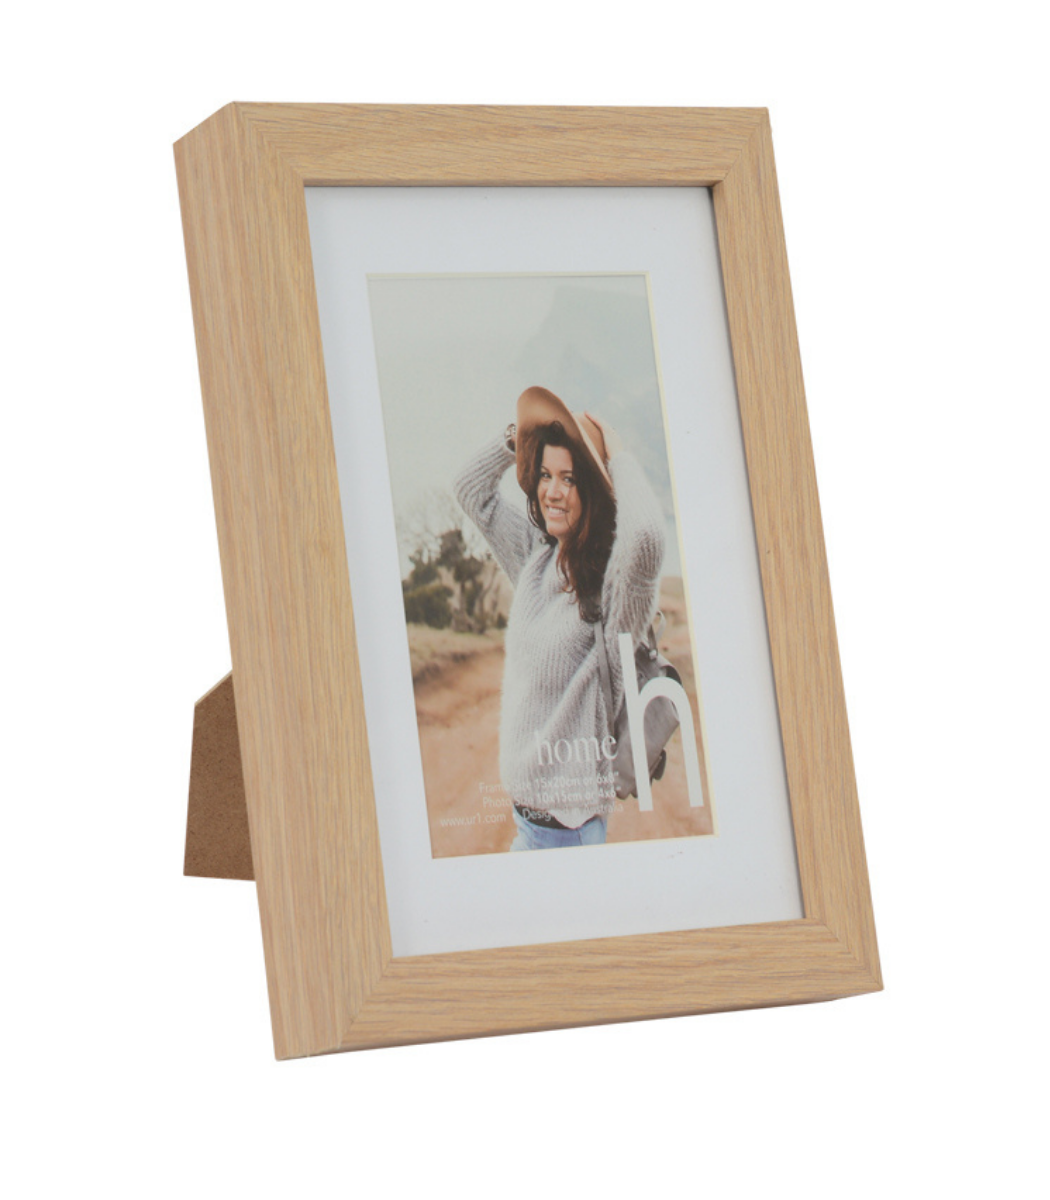 Home 6x8 Oak Frame with 4x6 Opening